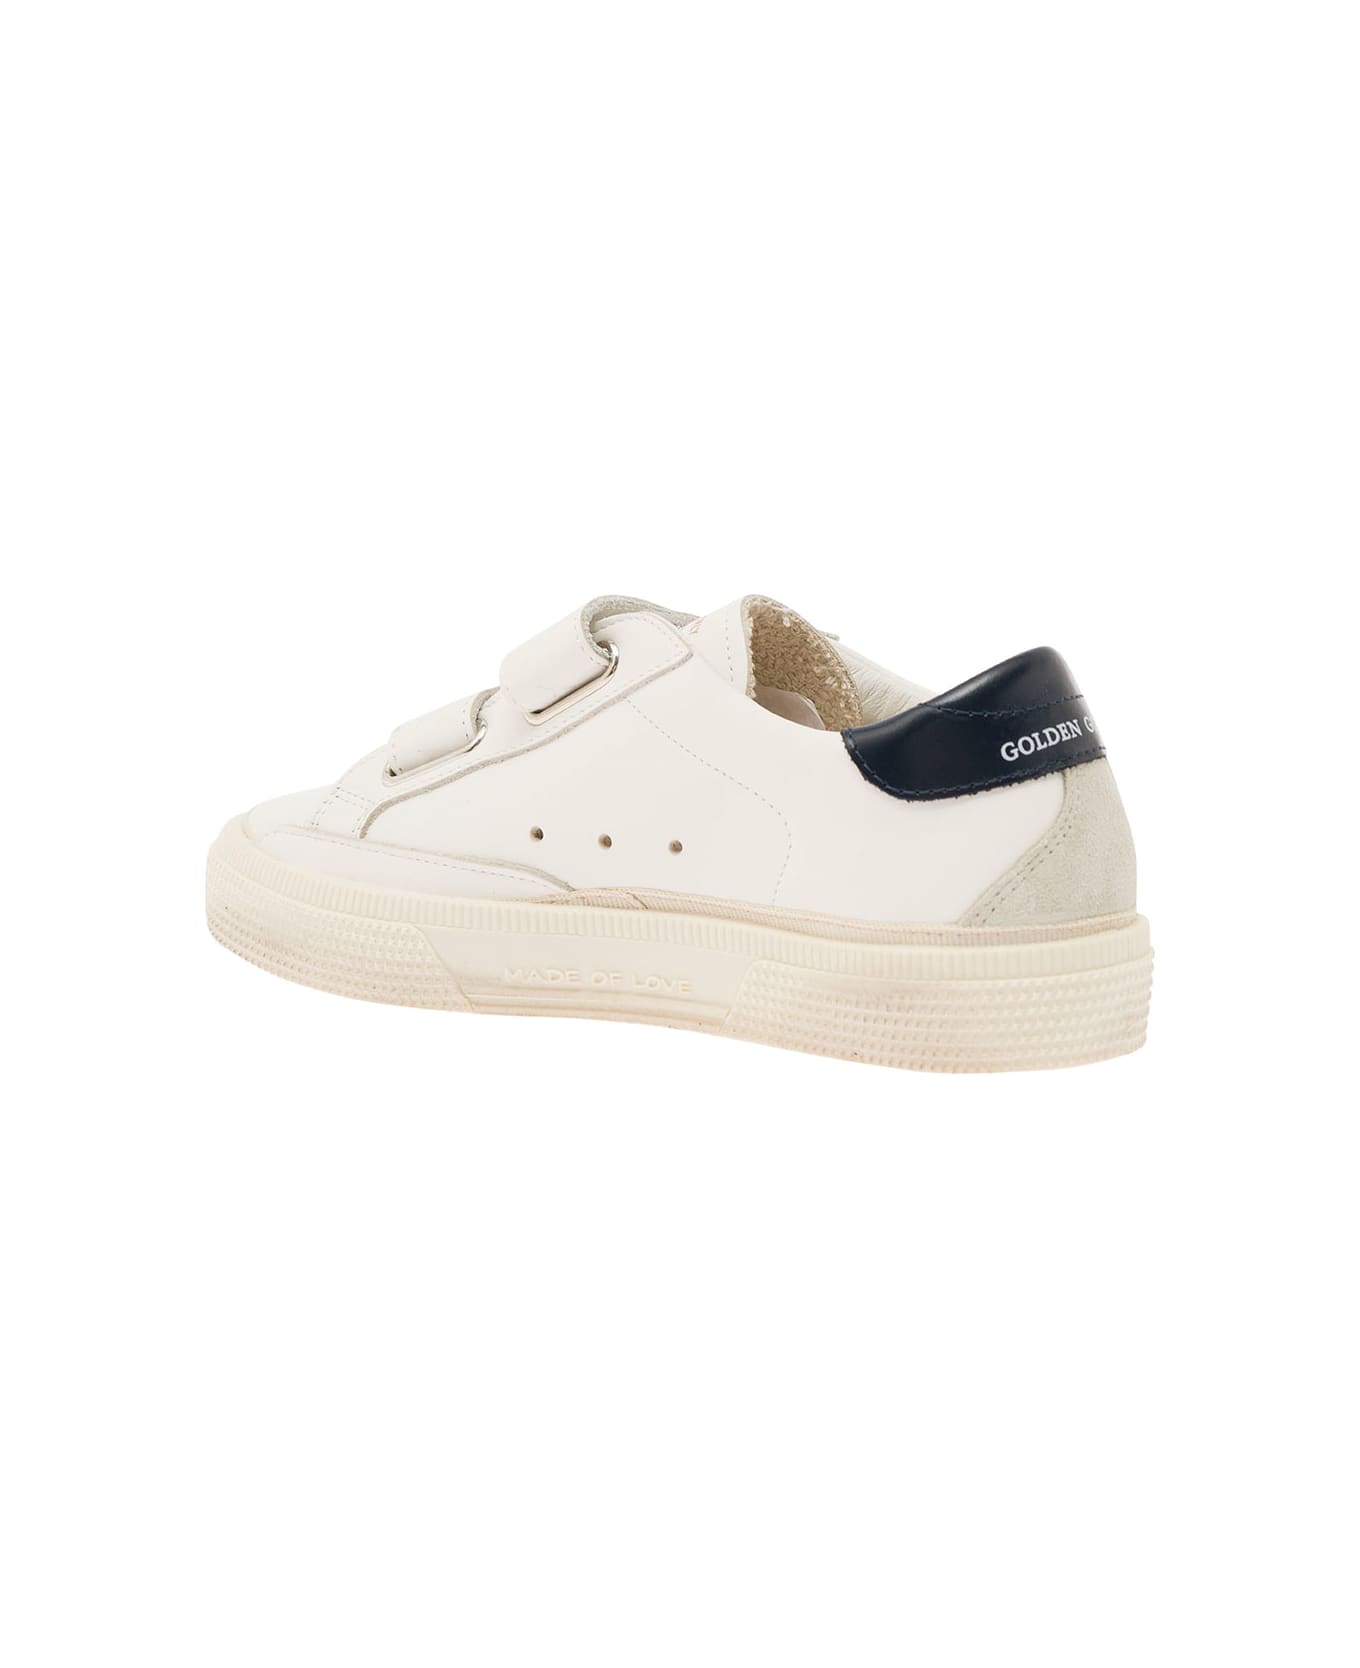 Golden Goose May School Leather Upper And Heel Suede Star And Spur Include Stesso Codice Gyf - White